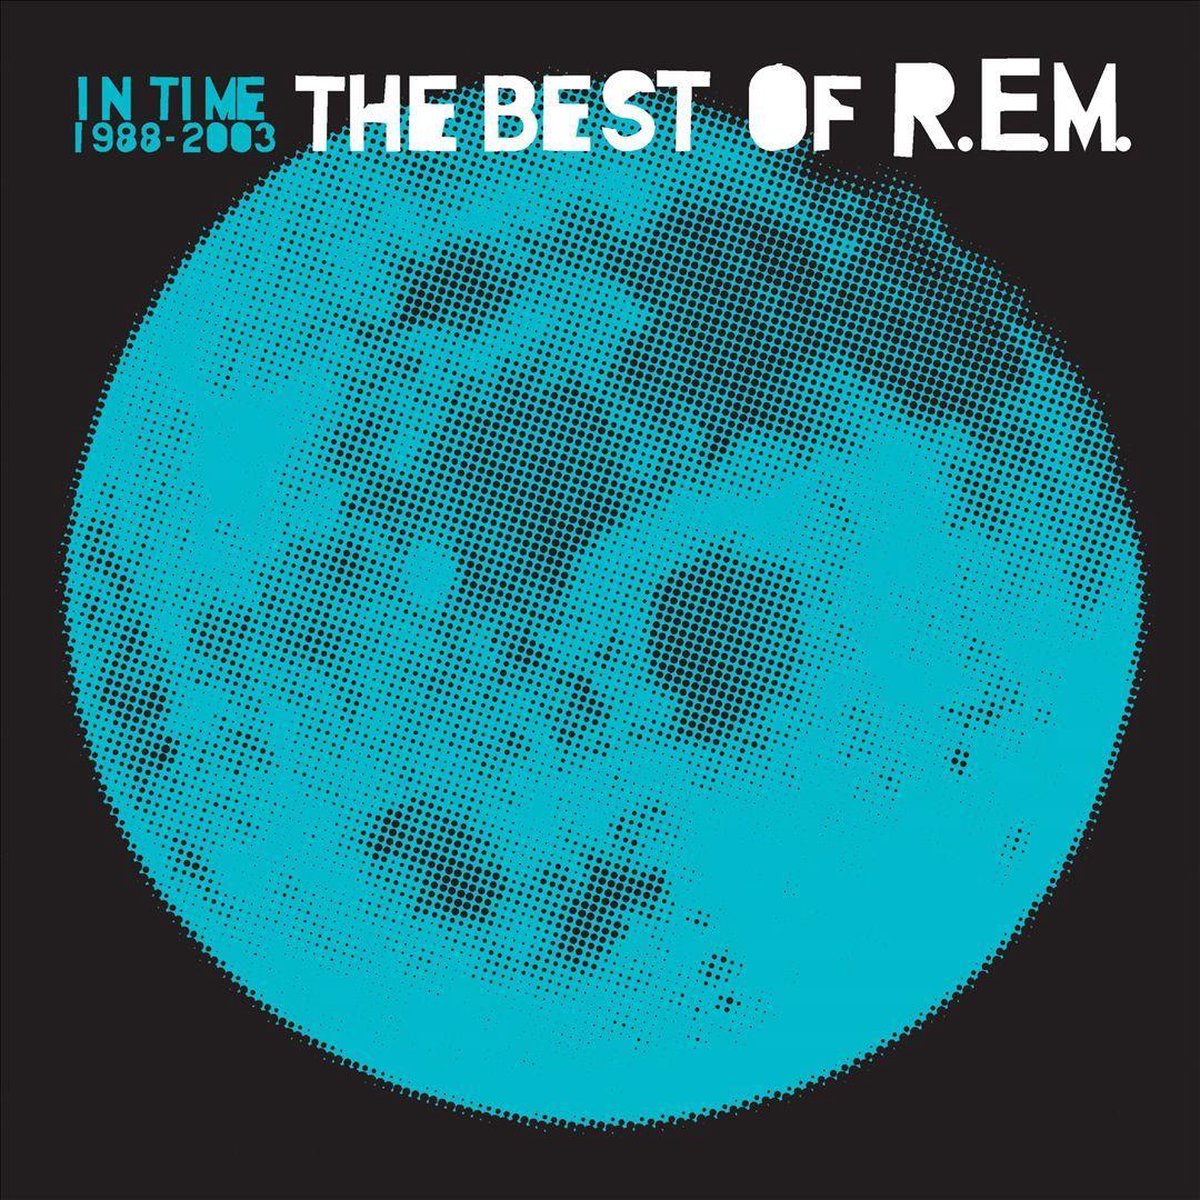 R.E.M. In Time: The Best Of R.E.M. 1988-2003 cover artwork